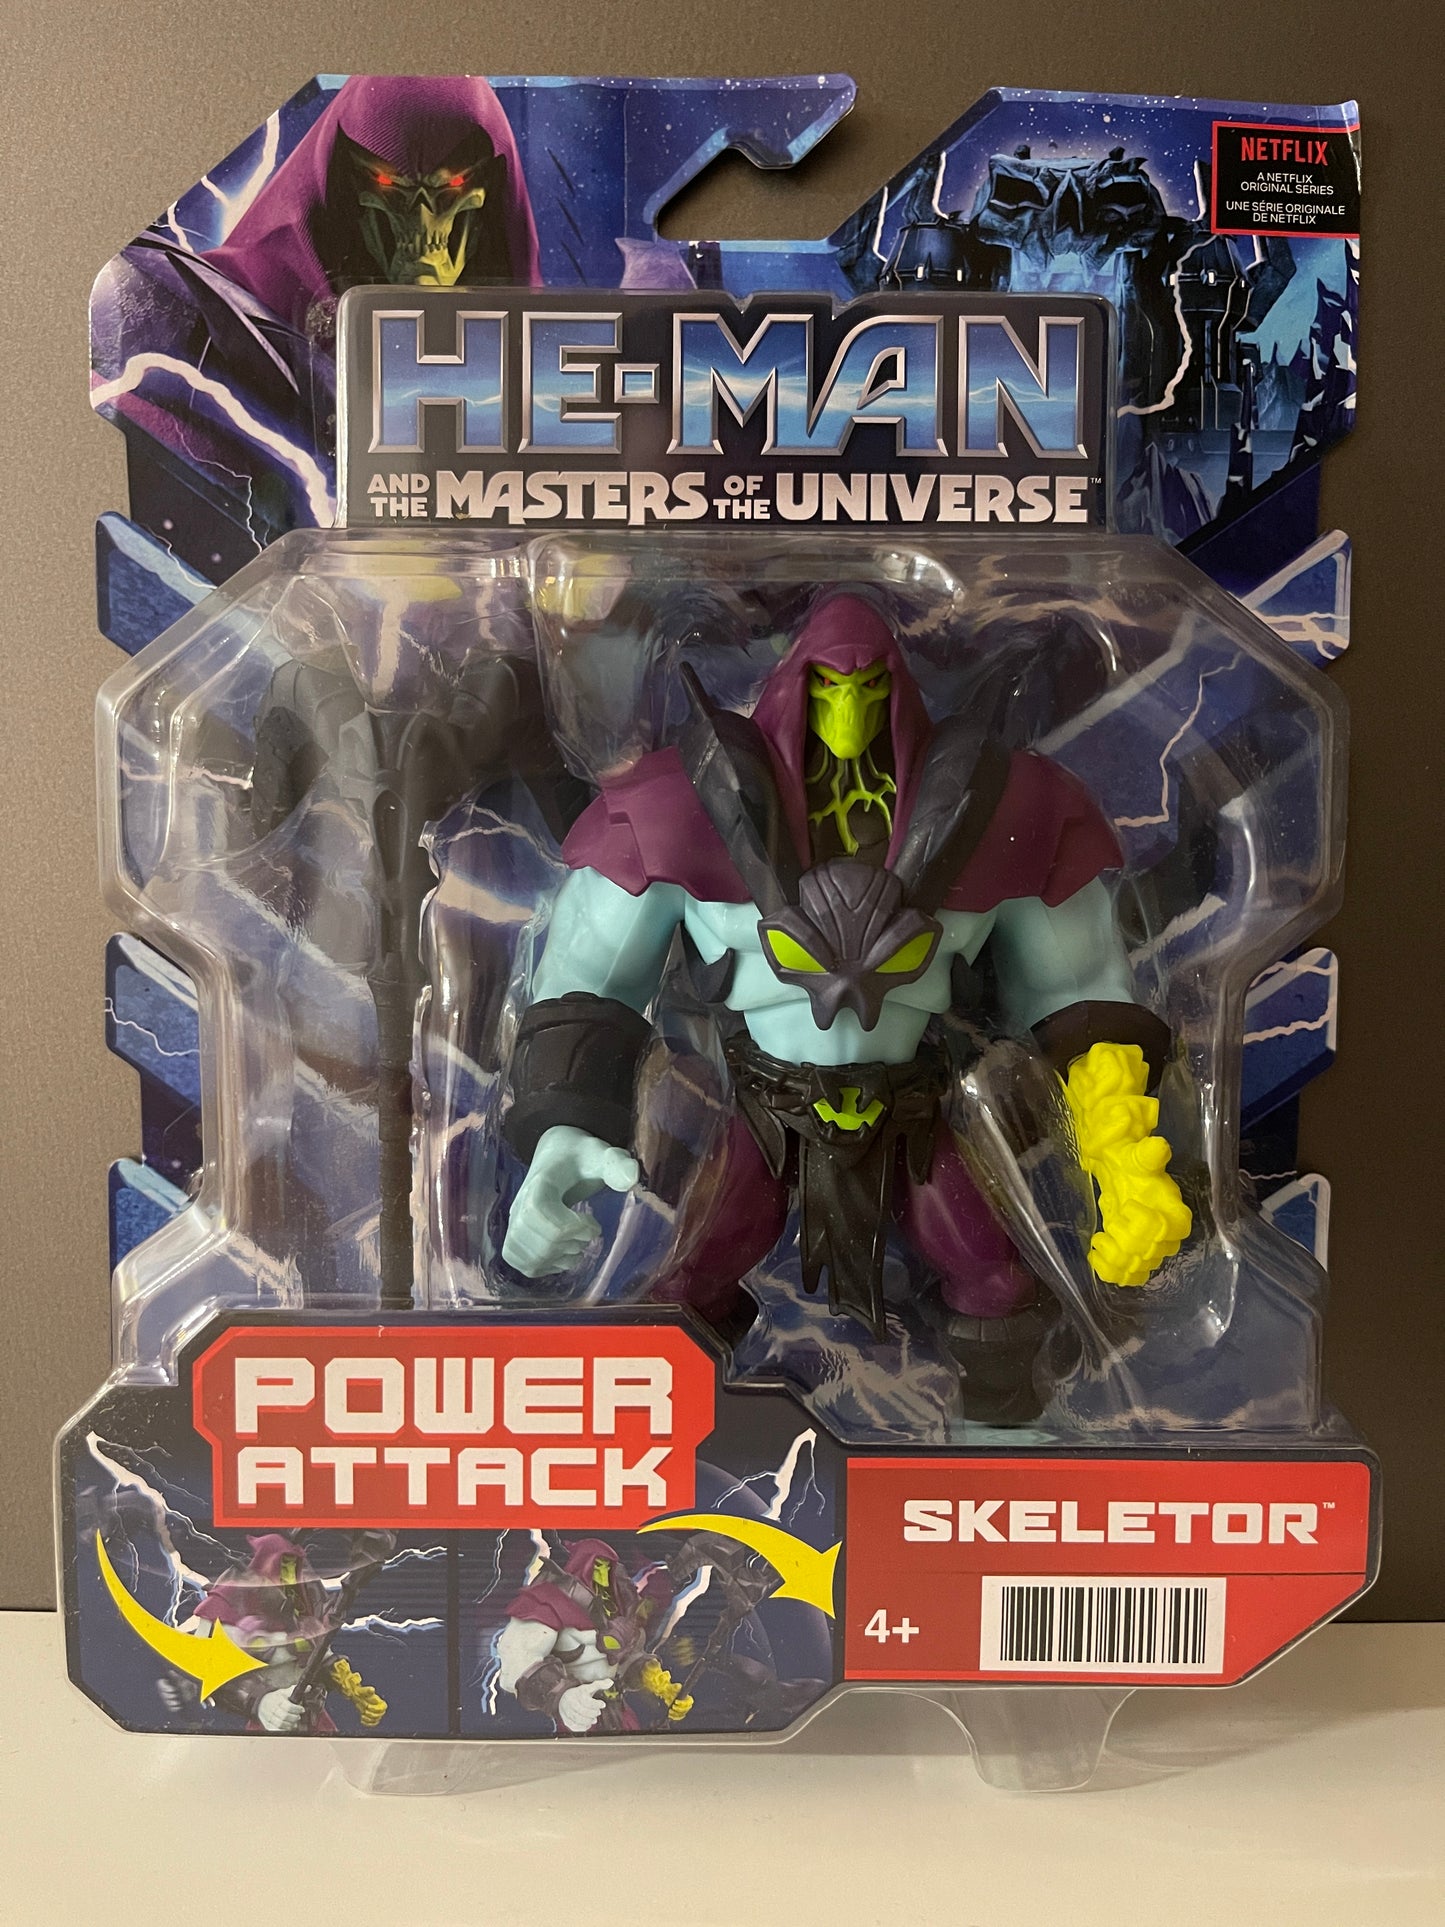 He-Man and the Masters of the Universe - Skeletor - Power Attack Netflix (Mattel)